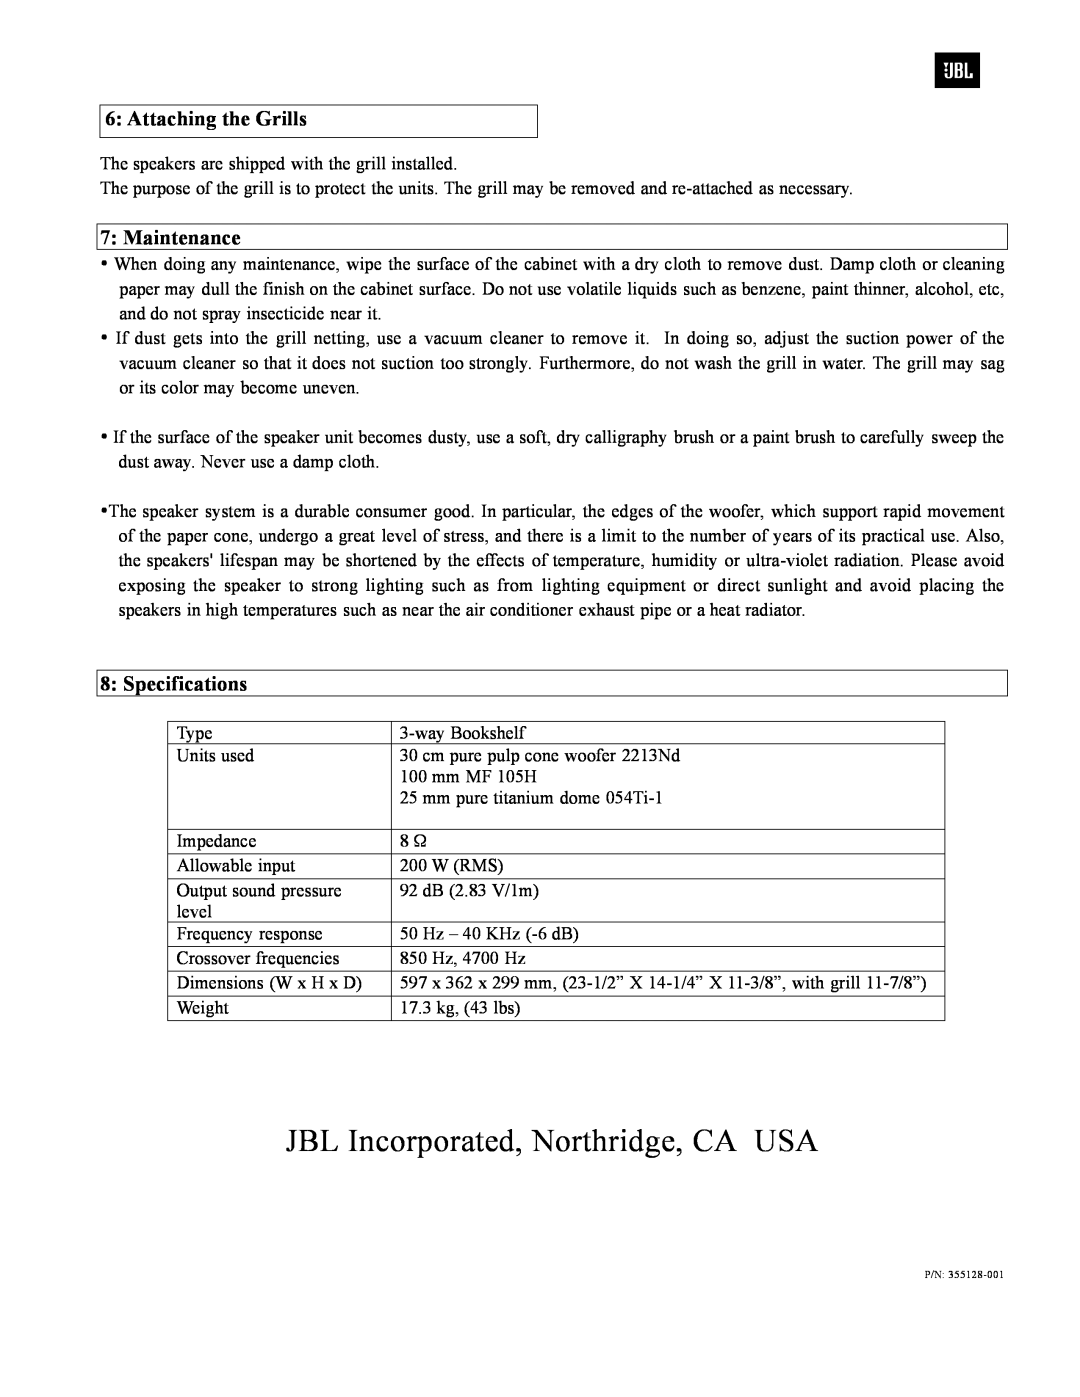 JBL 4318 owner manual Attaching the Grills, Maintenance, Specifications, JBL Incorporated, Northridge, CA USA 